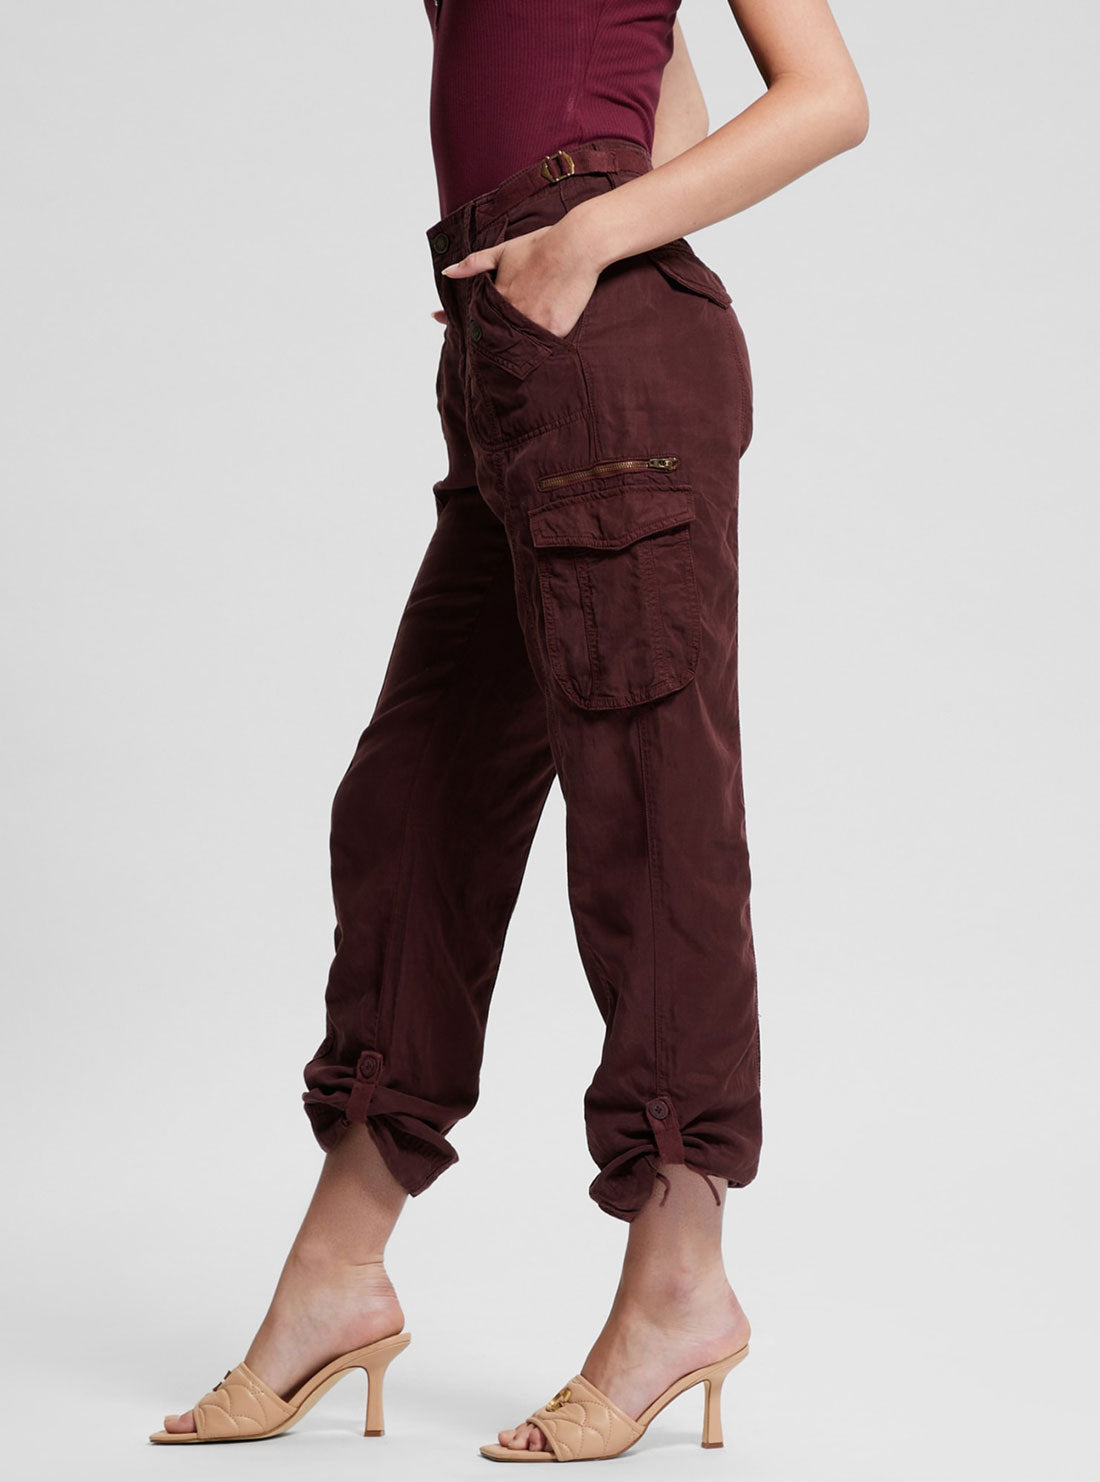 Eco Maroon Nessi Cargo Pants | GUESS Women's Apparel | side view